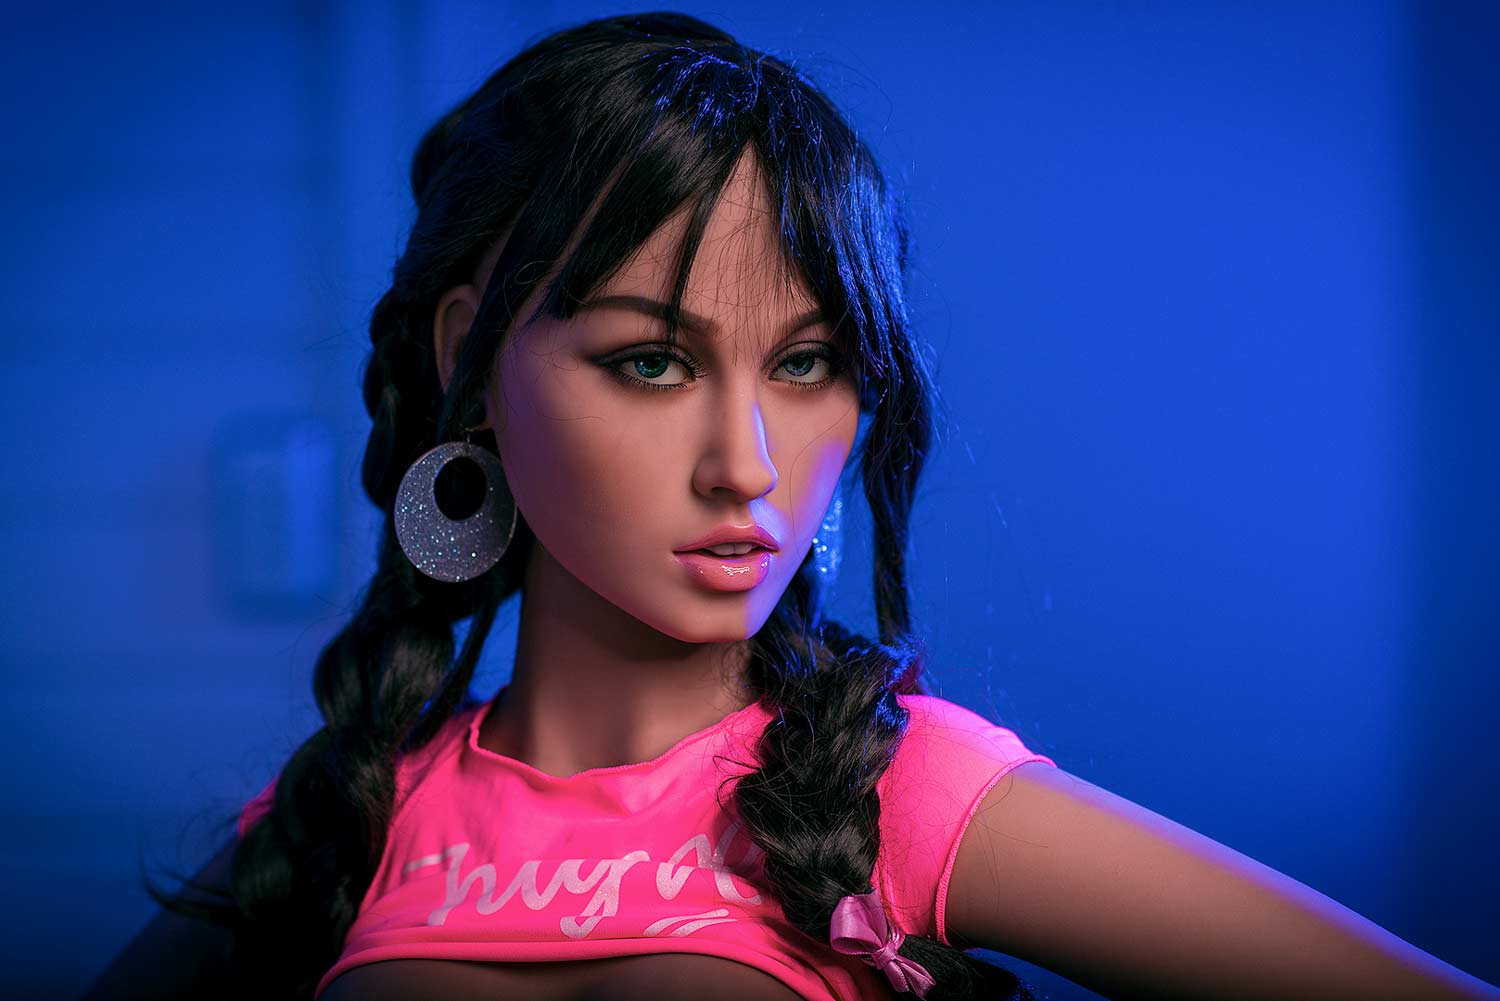 Sex doll with earrings